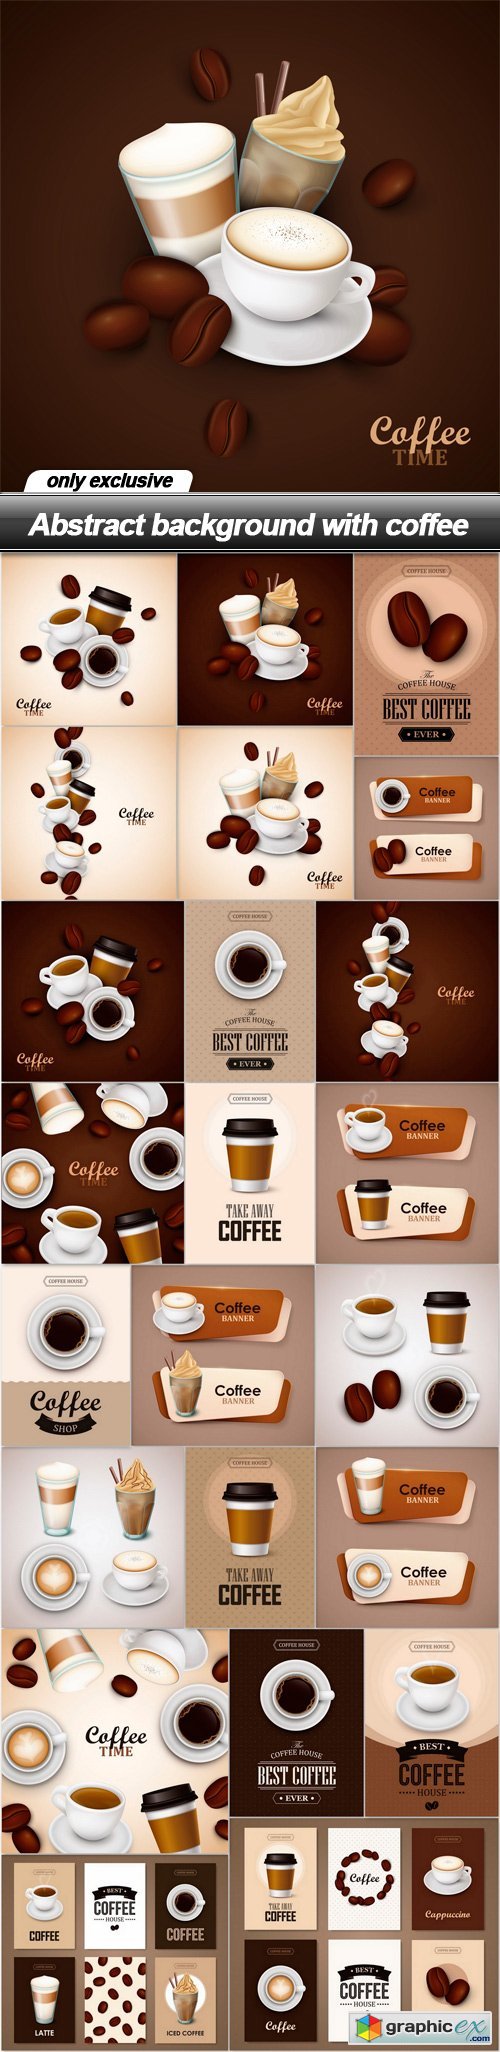 Abstract background with coffee - 23 EPS